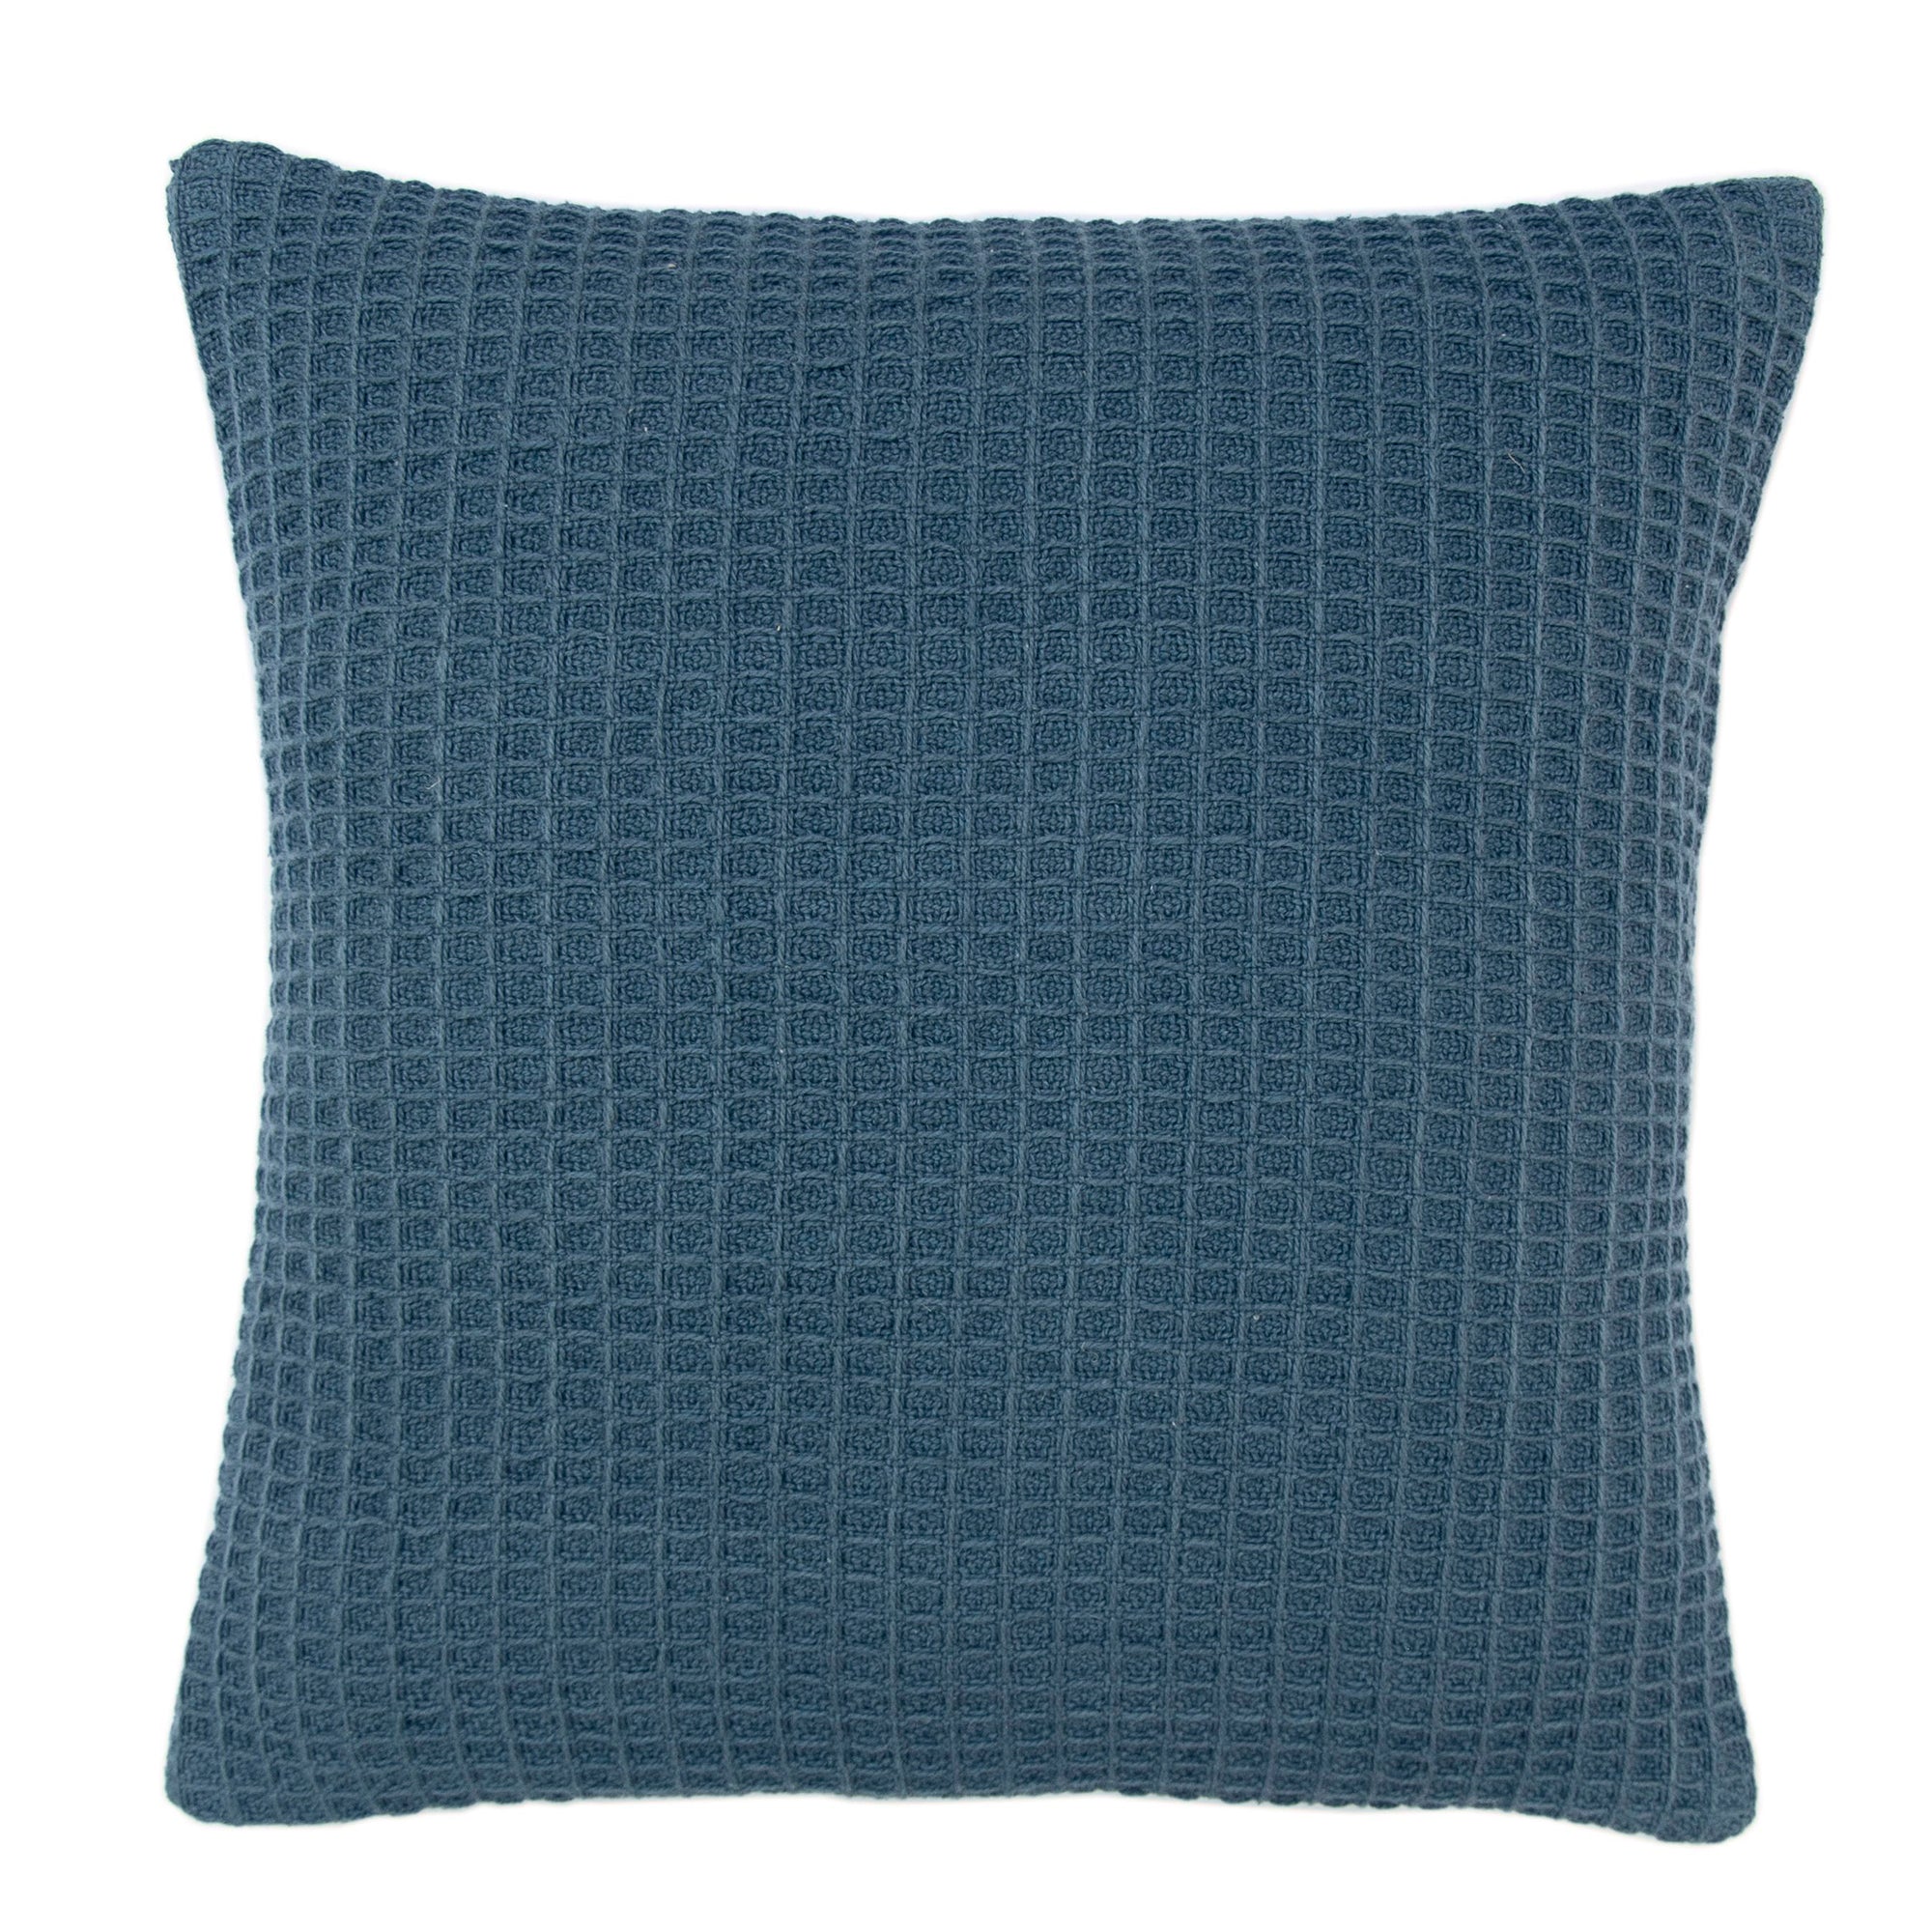 Bruges - Waffle Filled Cushion in Ink Blue - by Appletree Loft